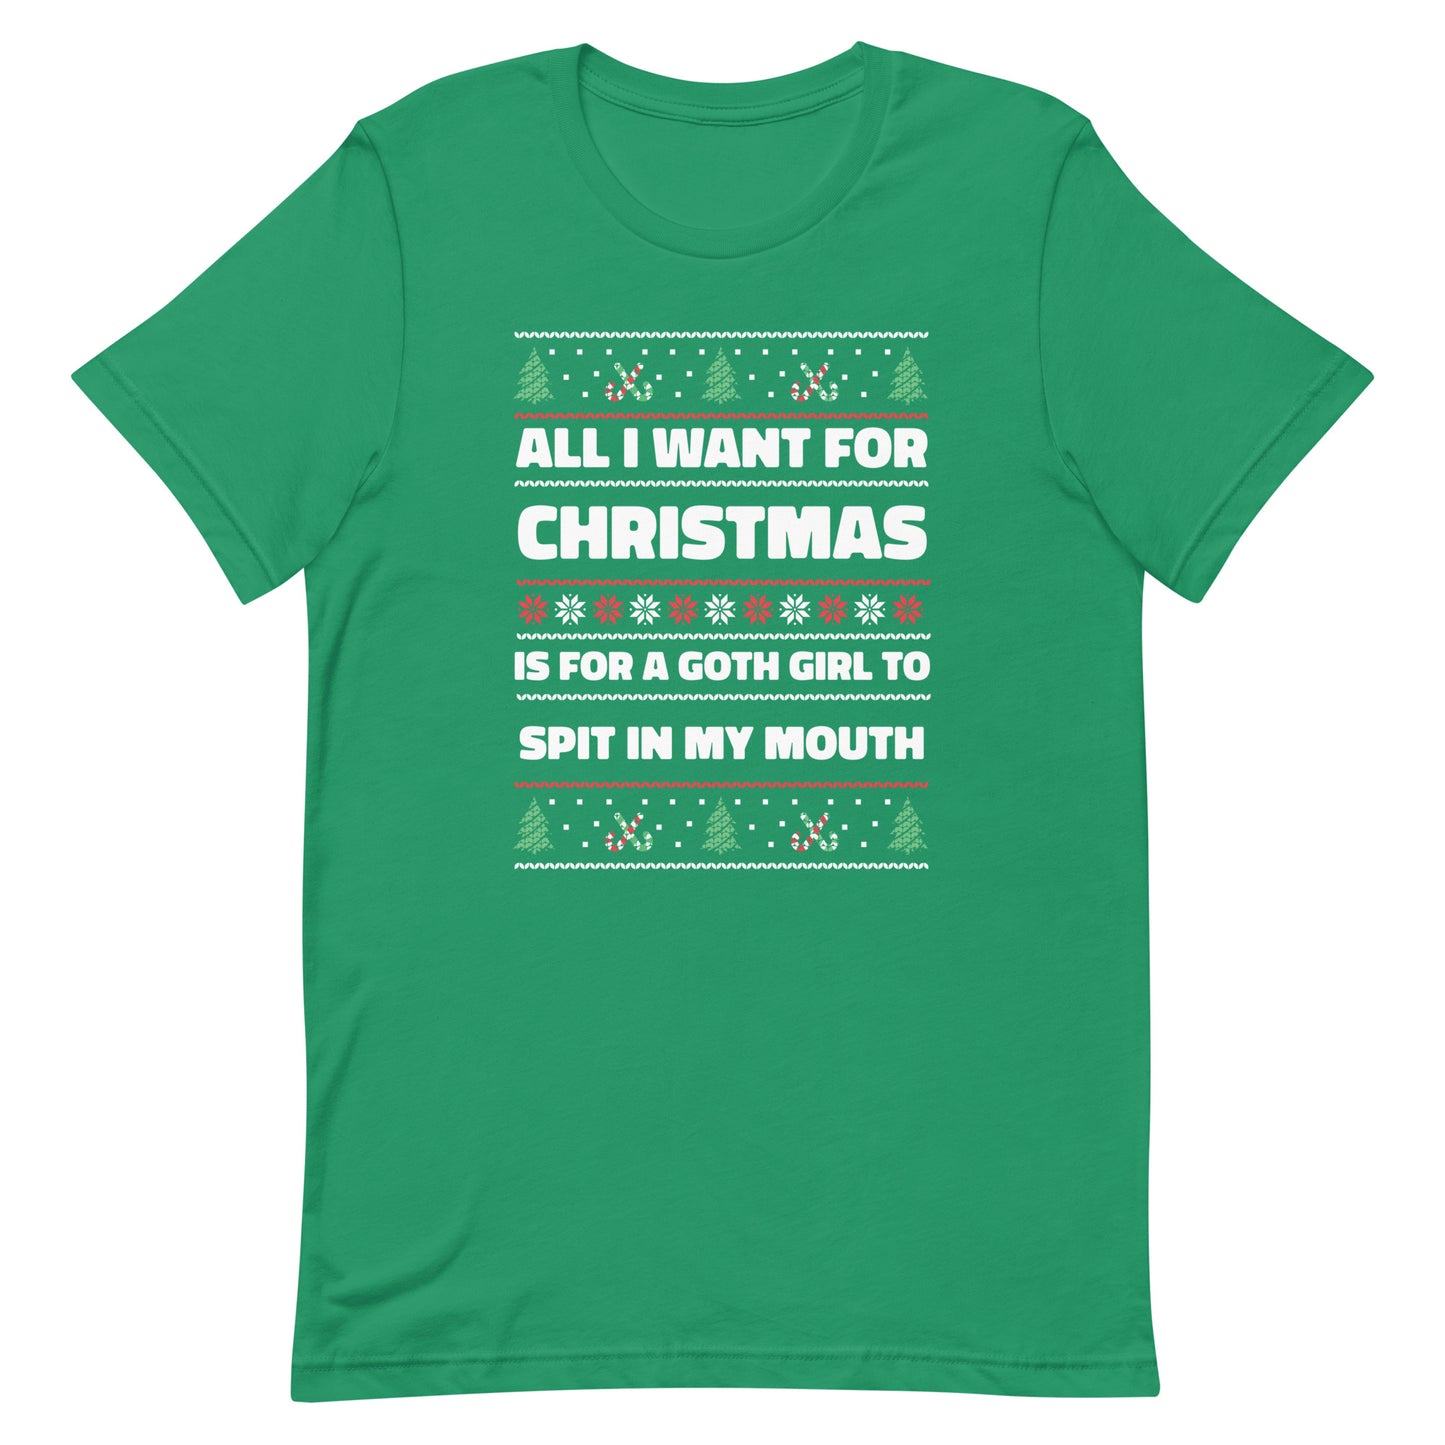 All I Want For Christmas is a Goth Girl Unisex t-shirt